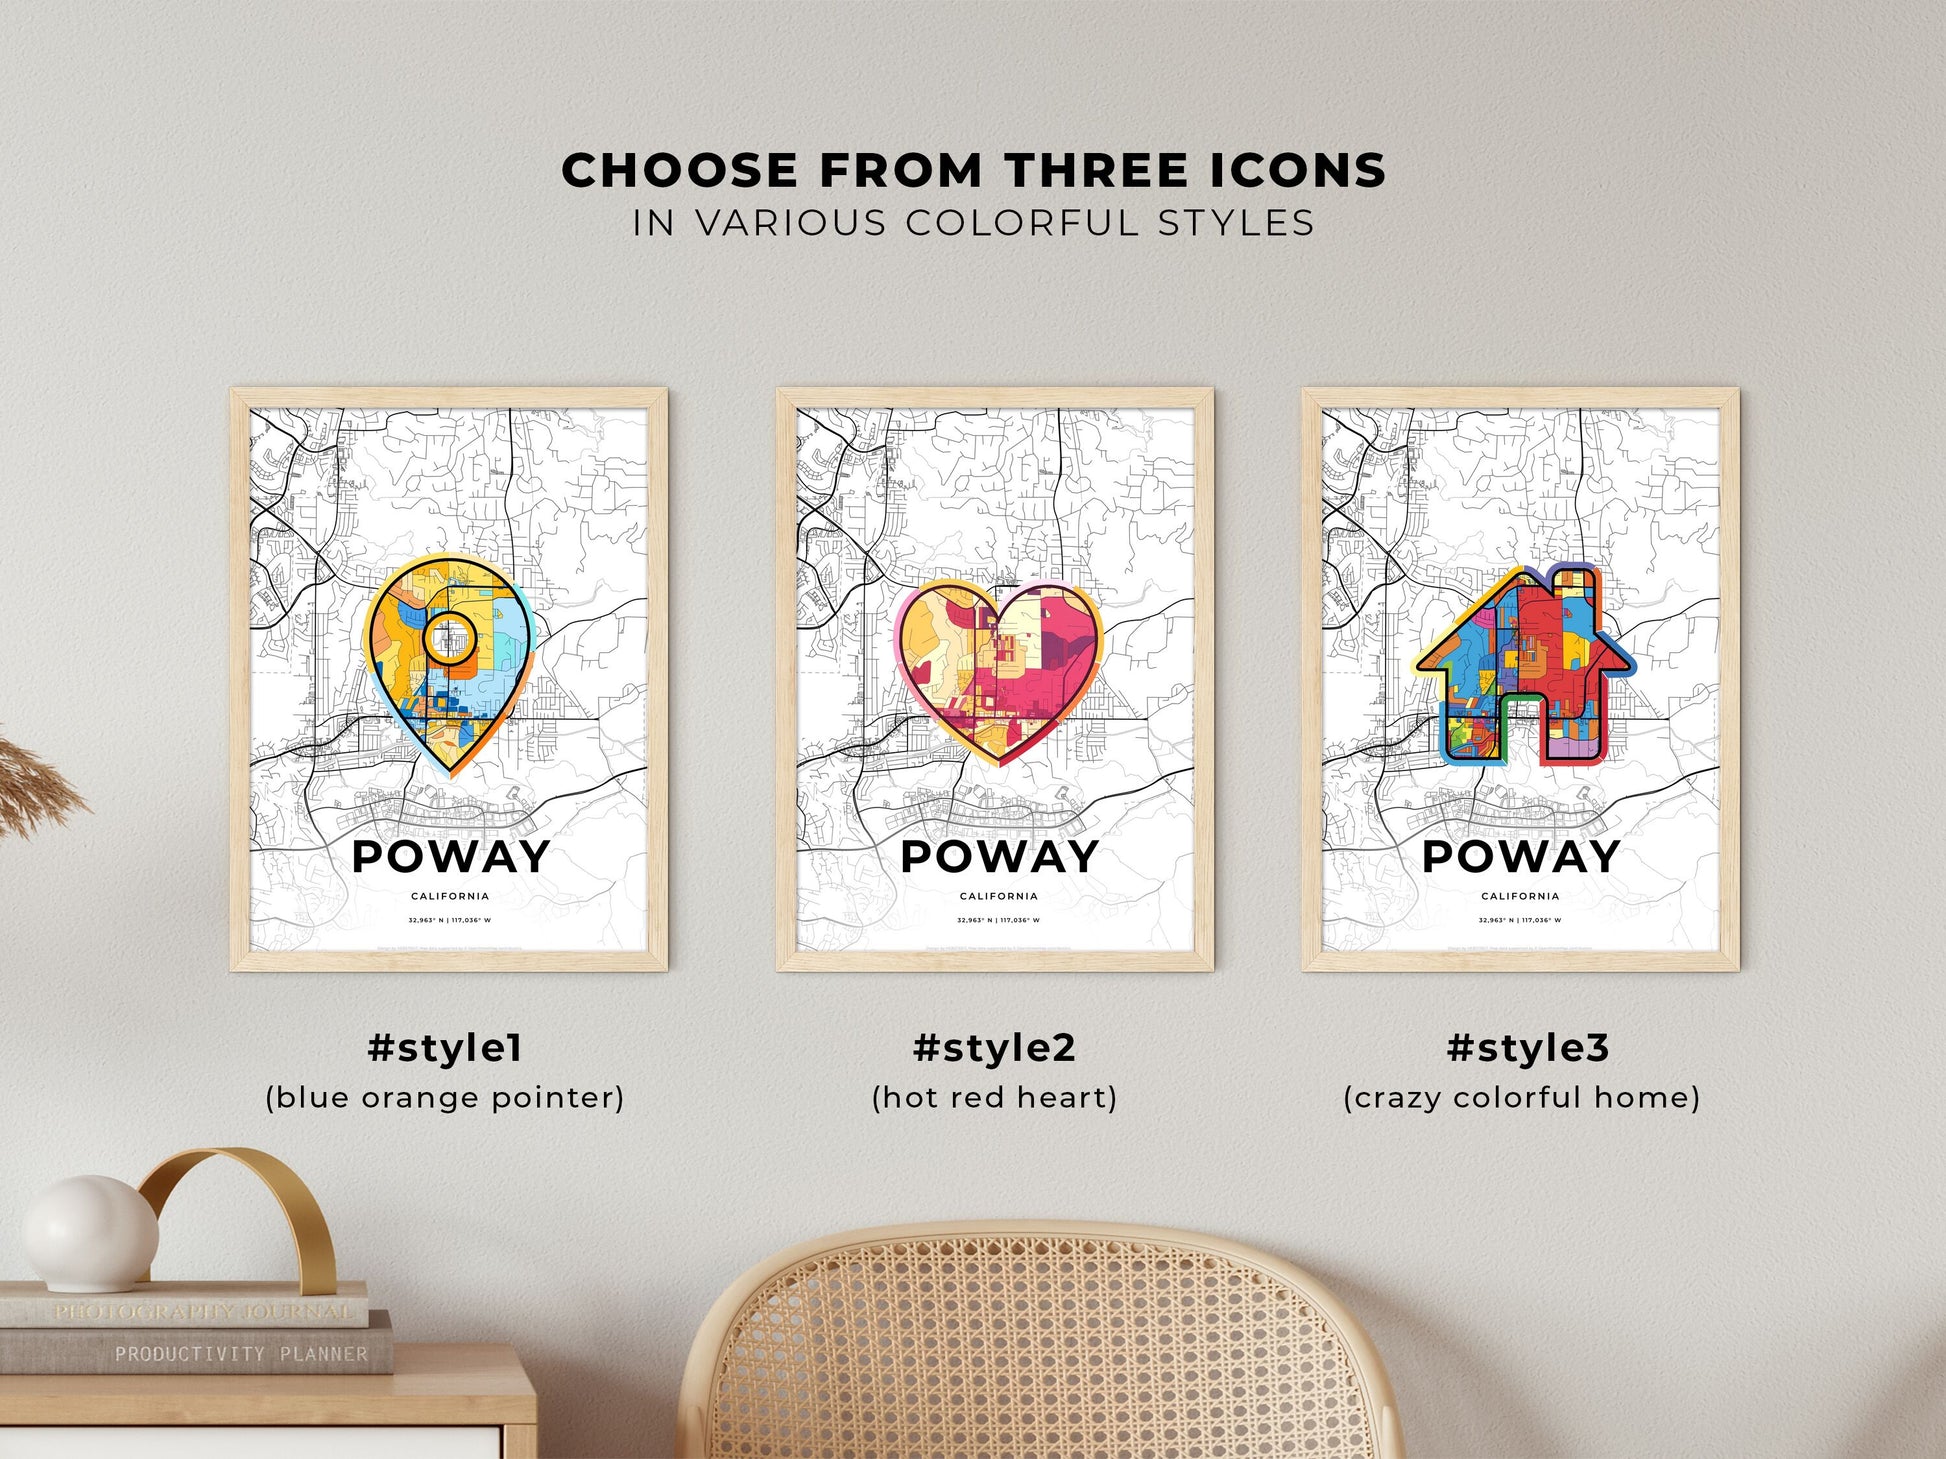 POWAY CALIFORNIA minimal art map with a colorful icon.